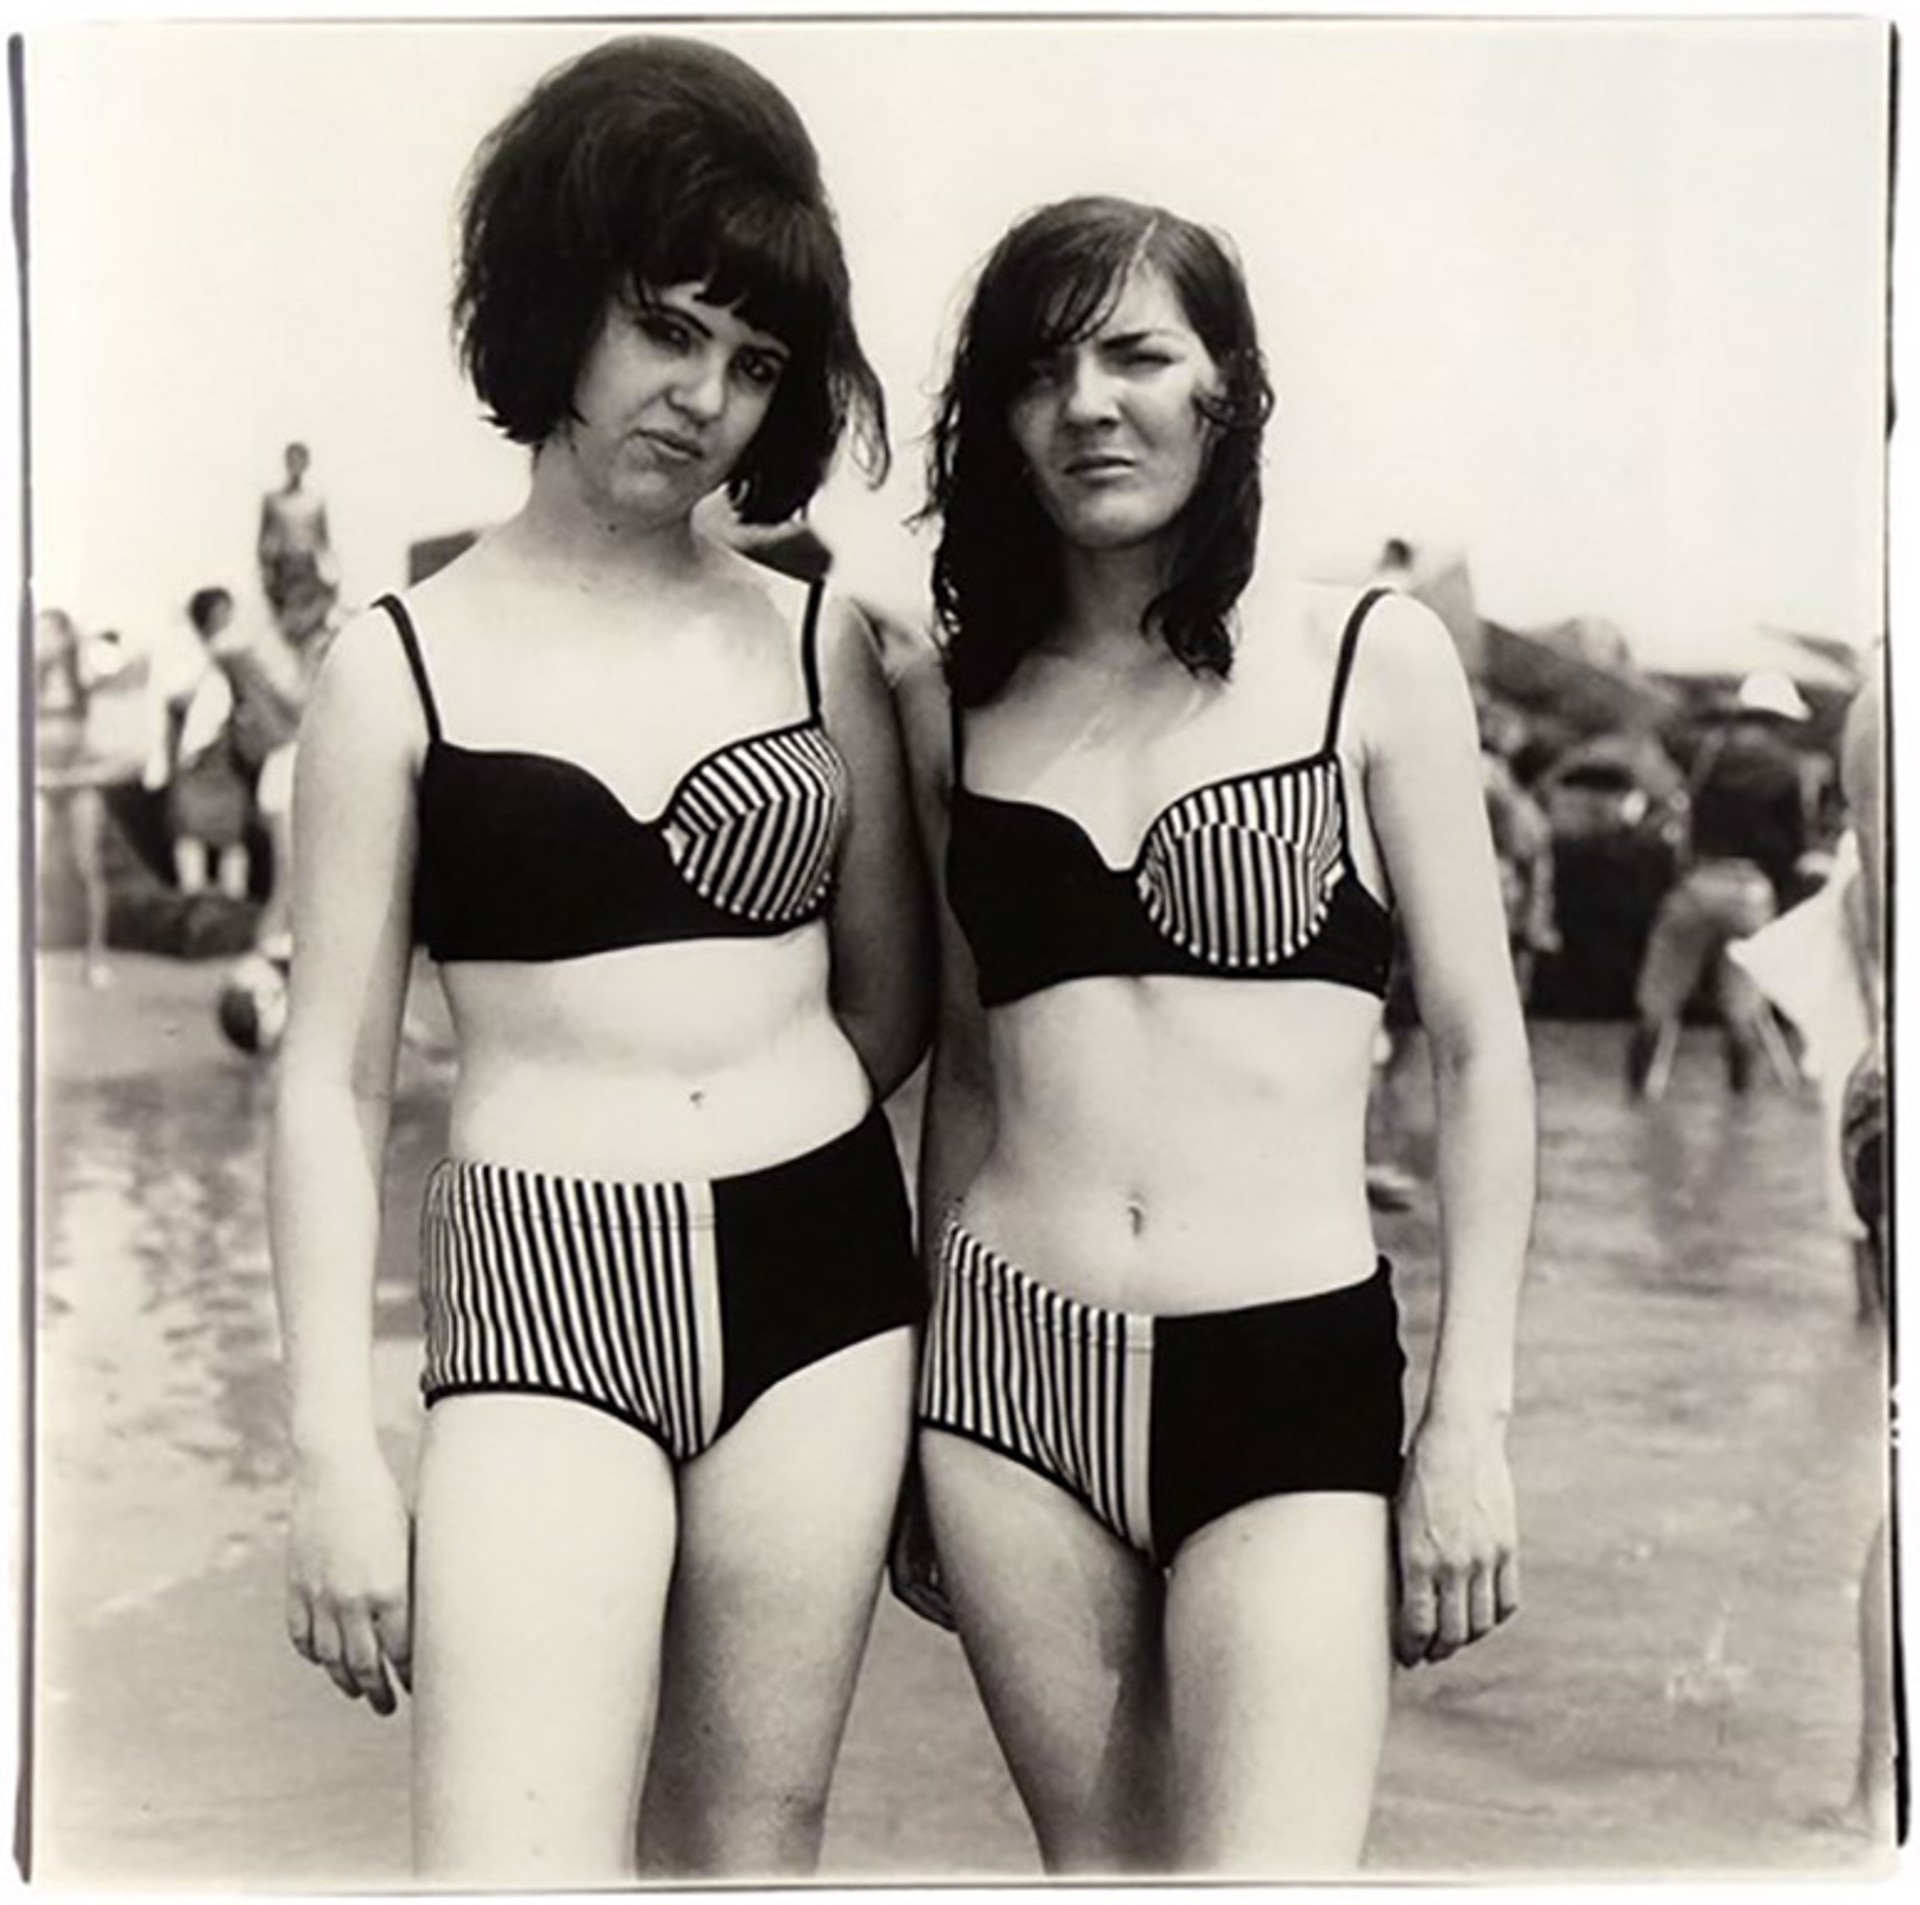 Two Girls in Matching Bathing Suits, Coney Island, NY by Diane Arbus